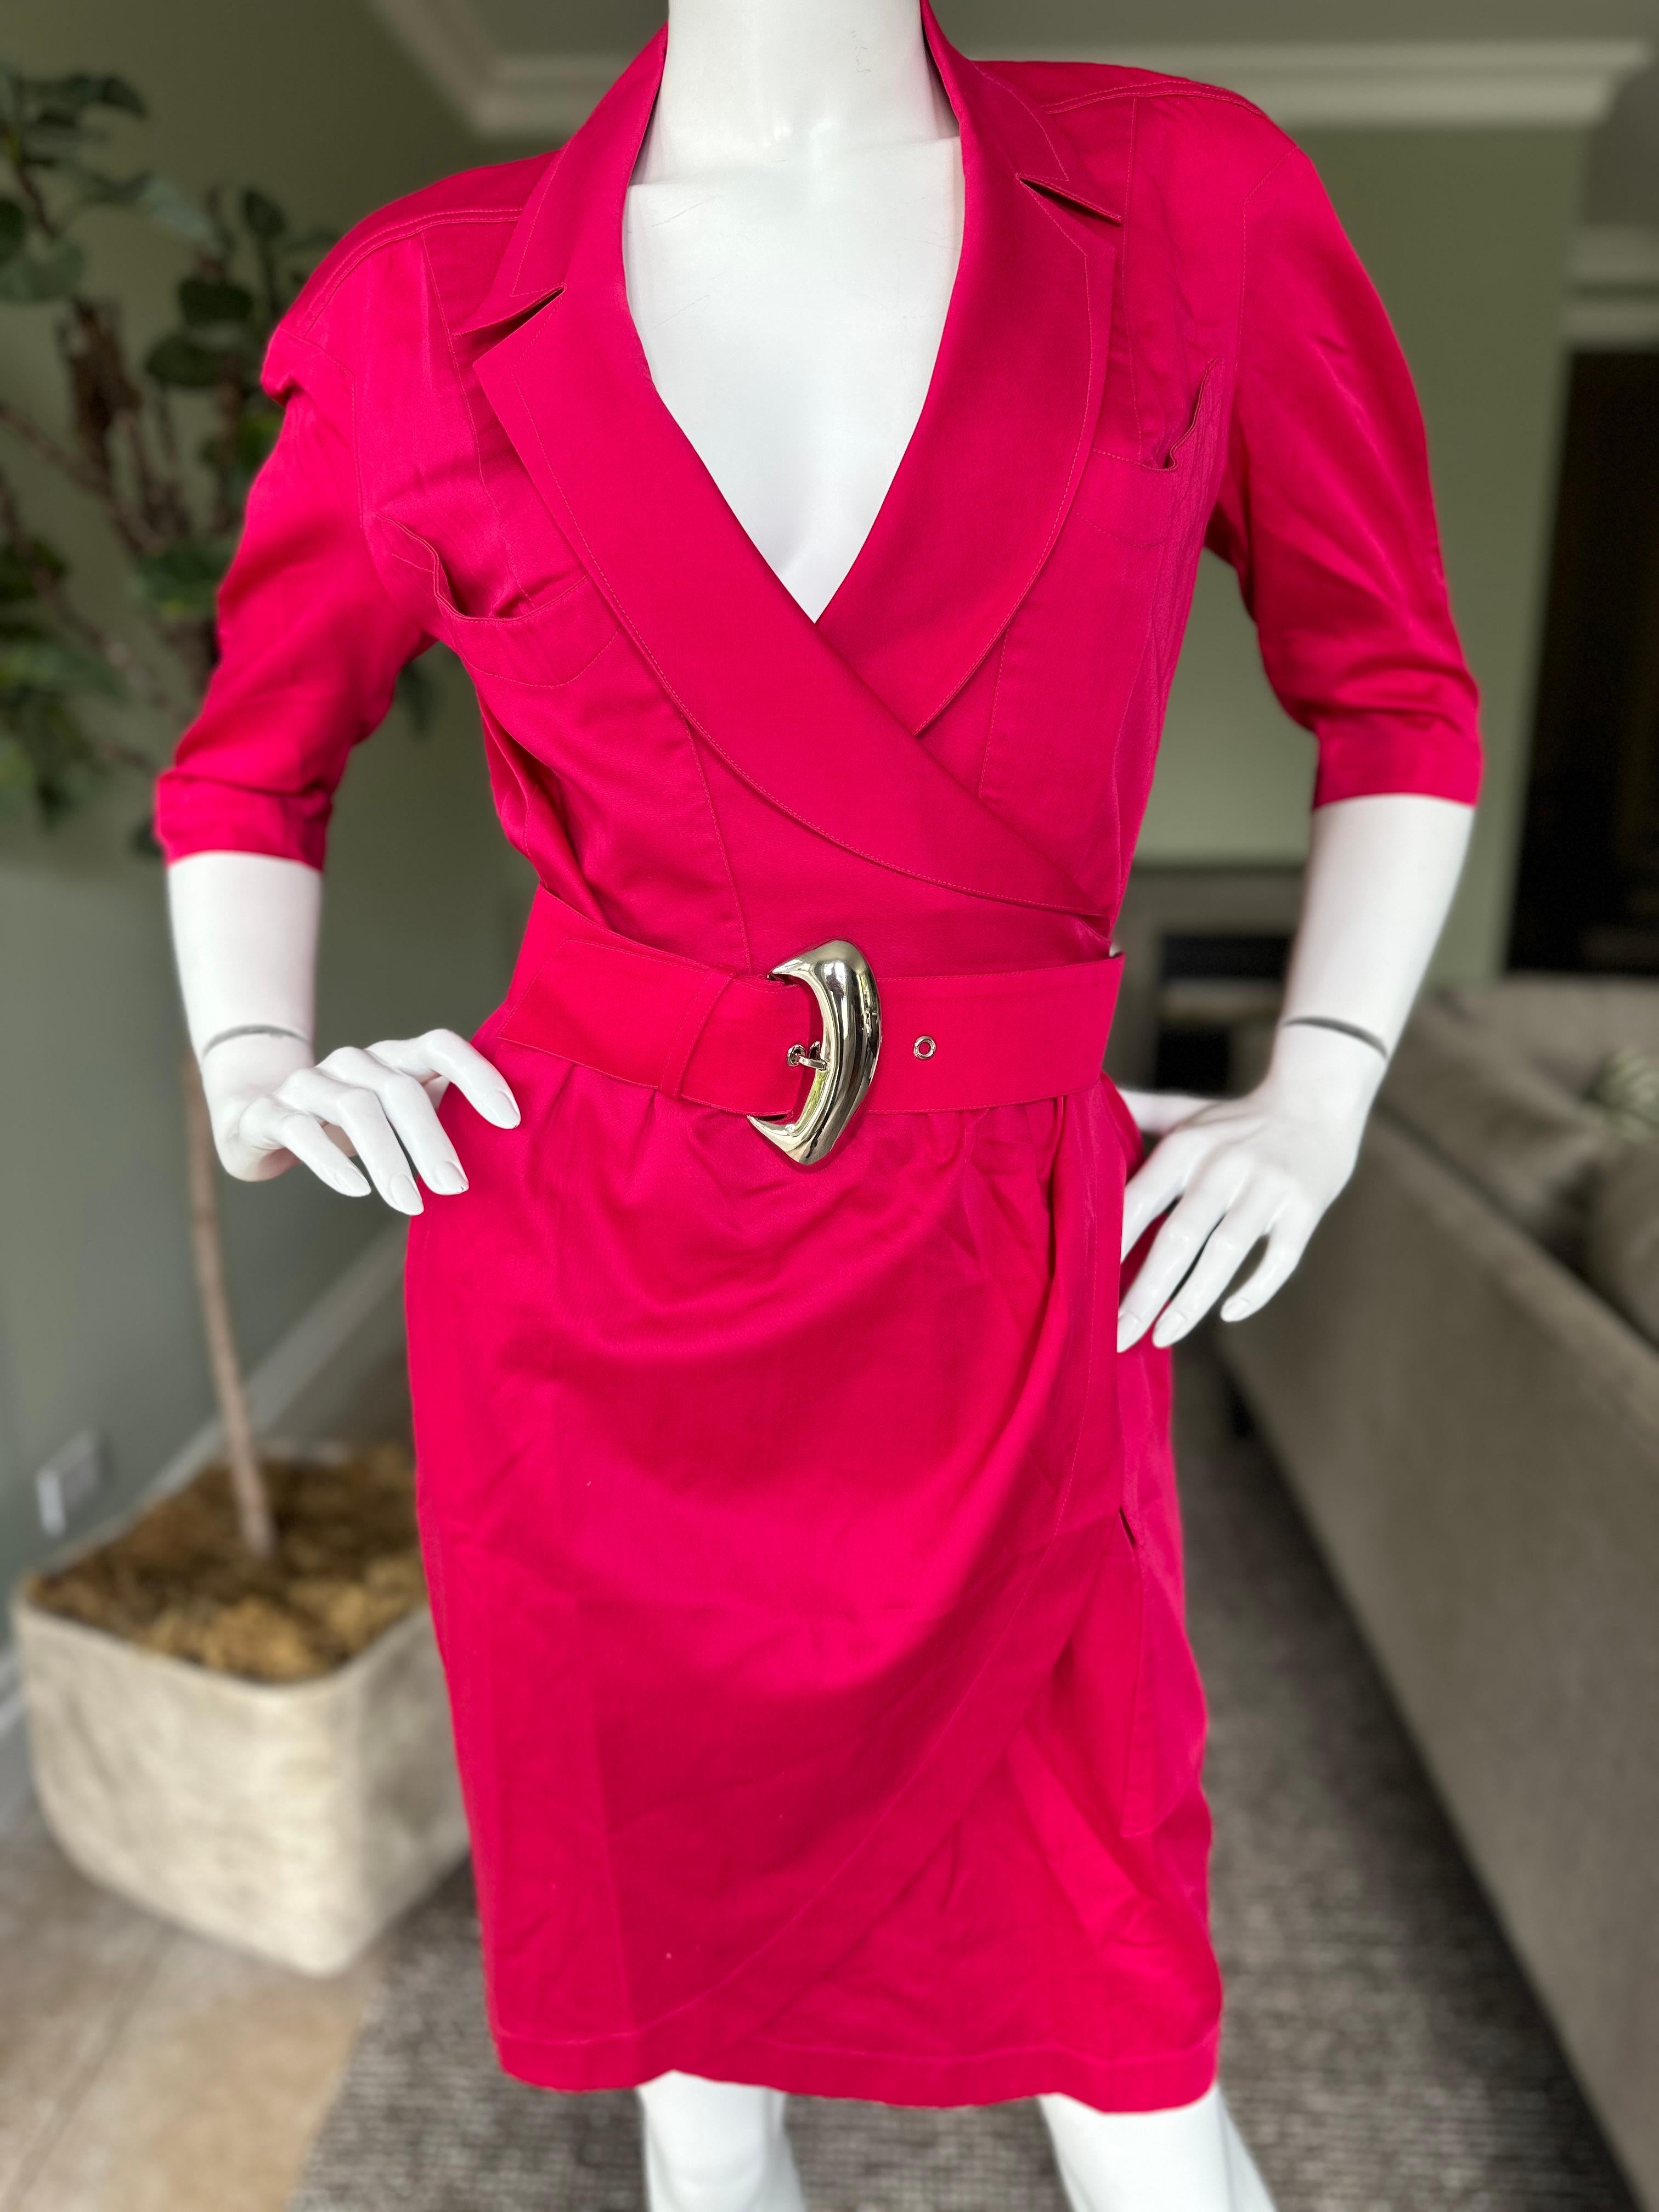 Thierry Mugler Vintage 1980's Hot Pink Silk Wrap Style Dress with Mod Buckle For Sale 1